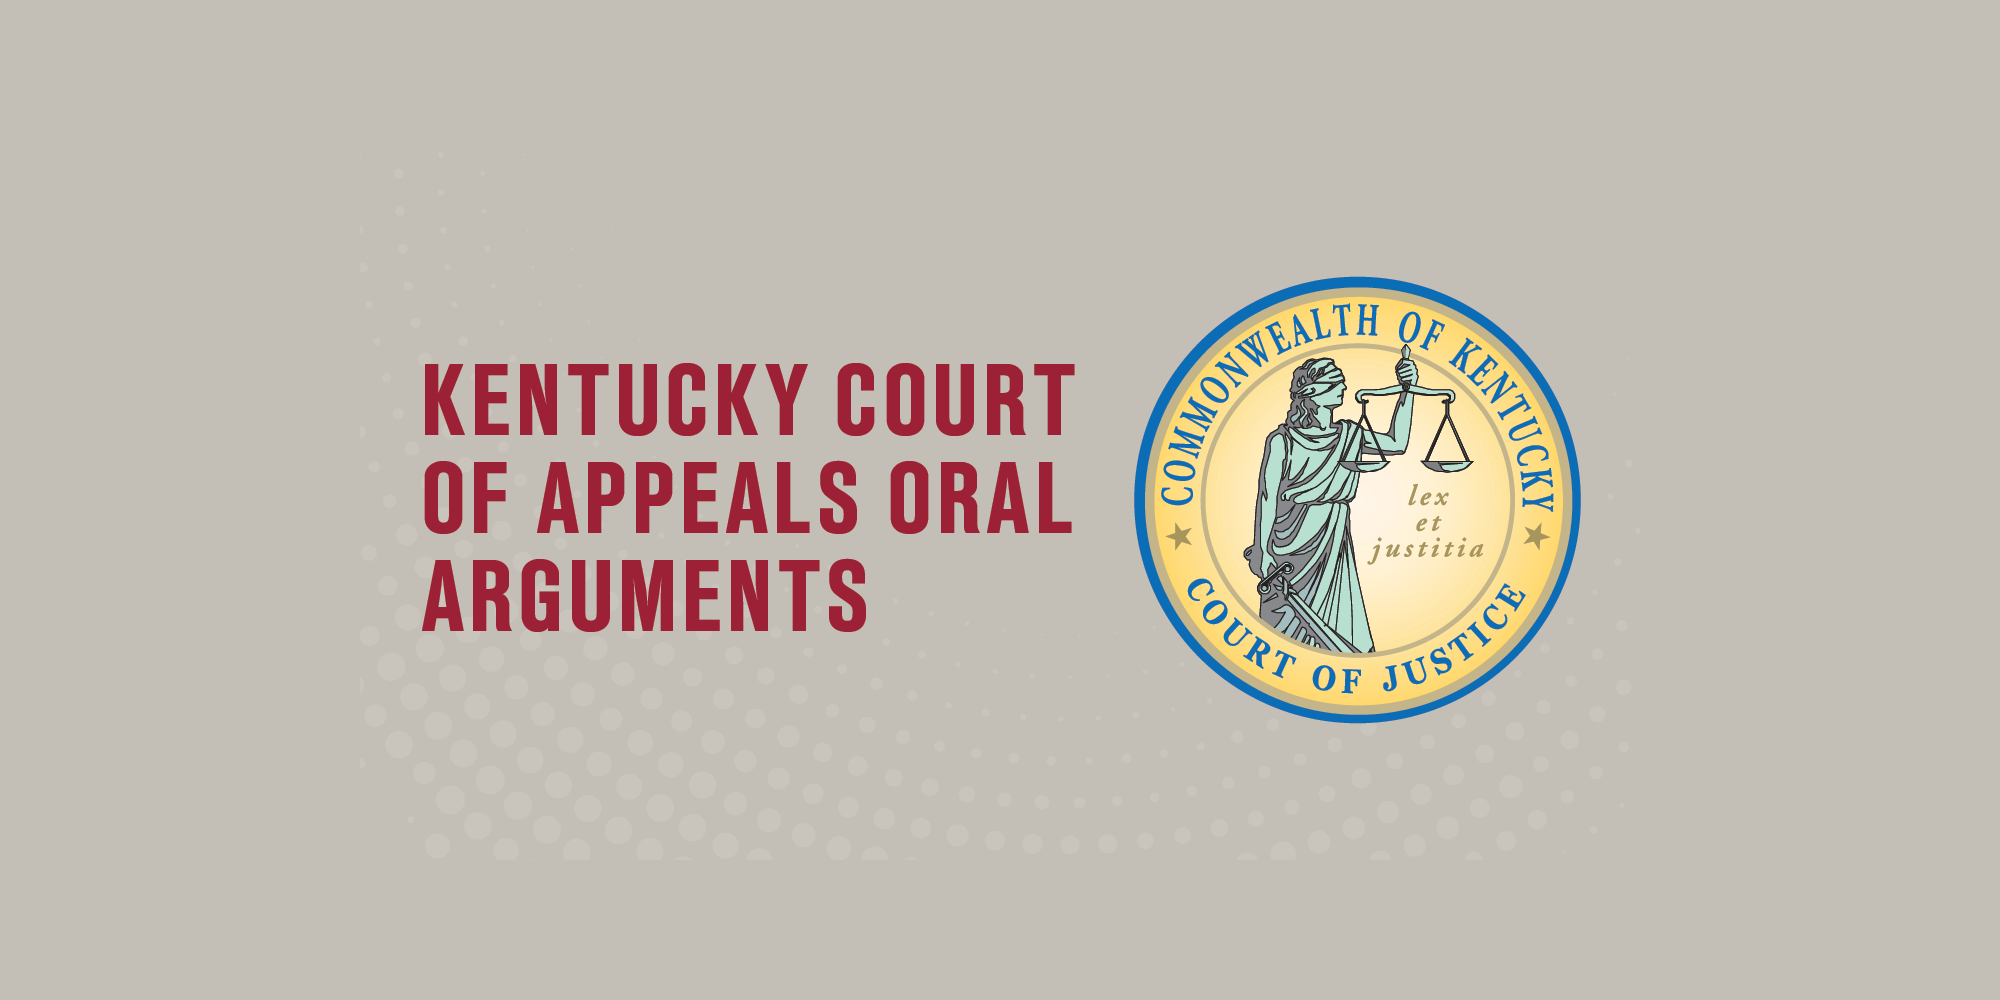 Transylvania Pre-Law and Policy Society to bring Court of Appeals session to campus Feb. 6